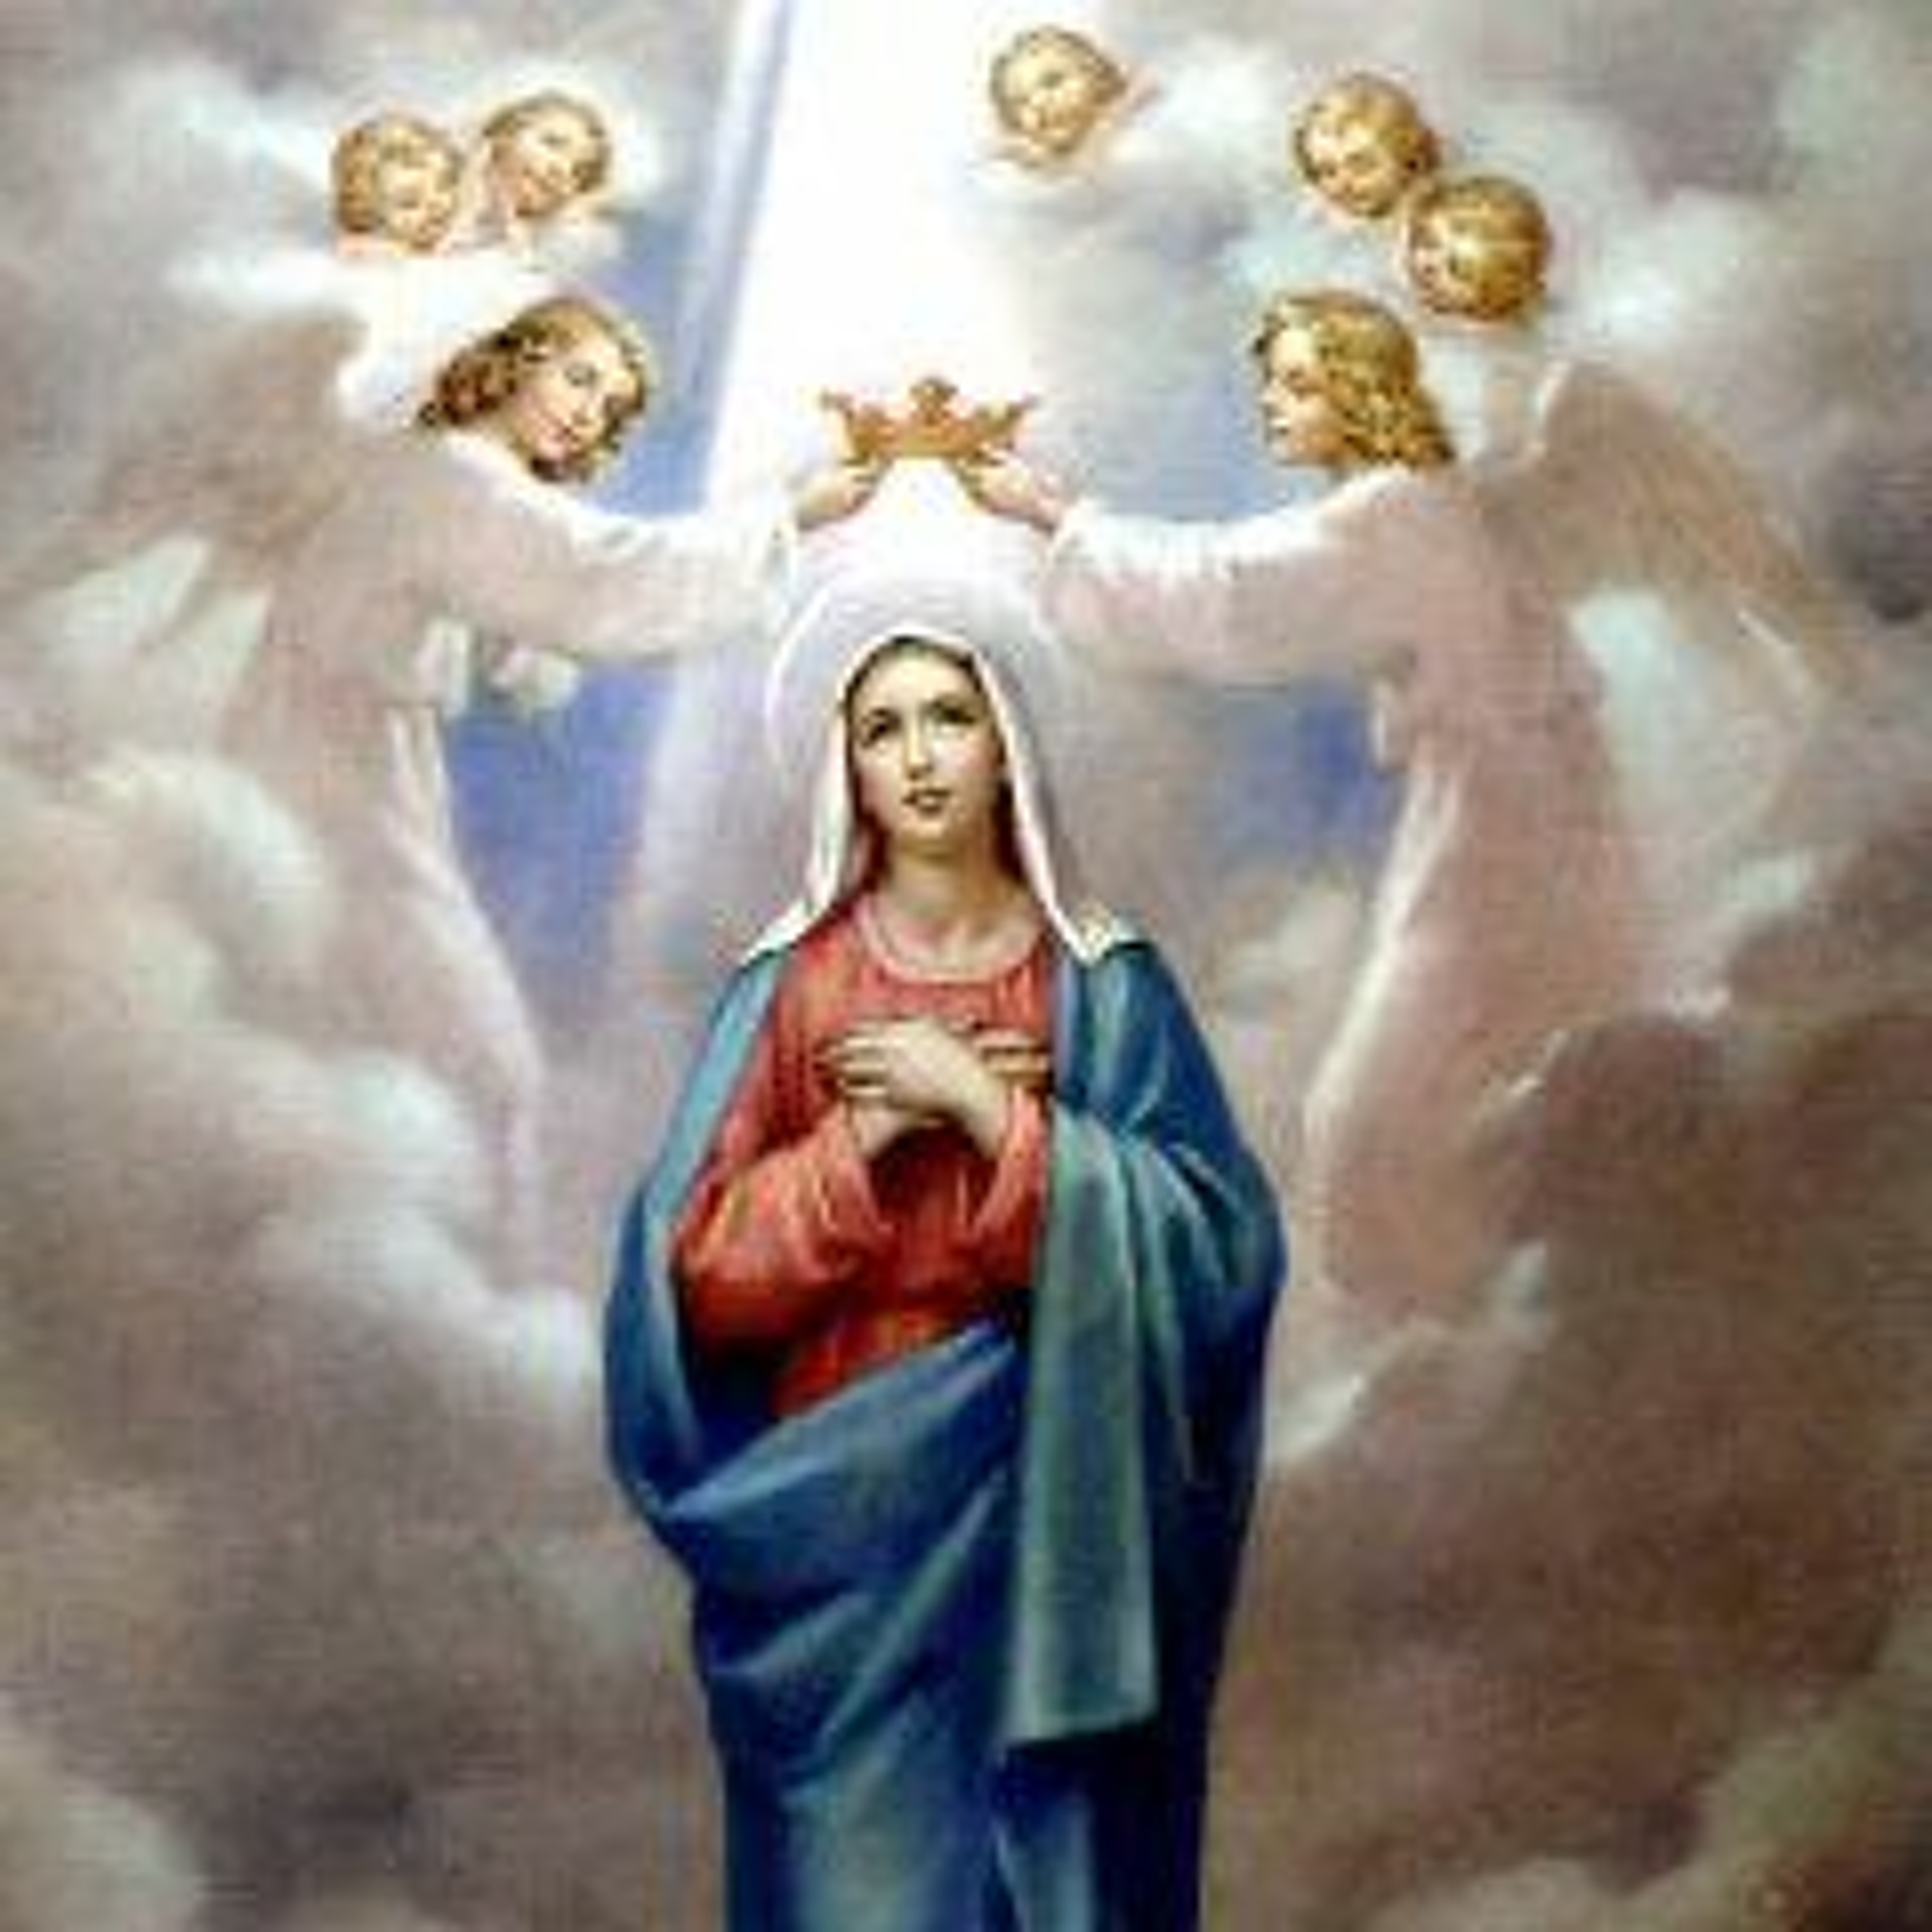 Assumption of the Blessed Virgin: Morning Prayer According to the 2019 Book of Common Prayer (ACNA)